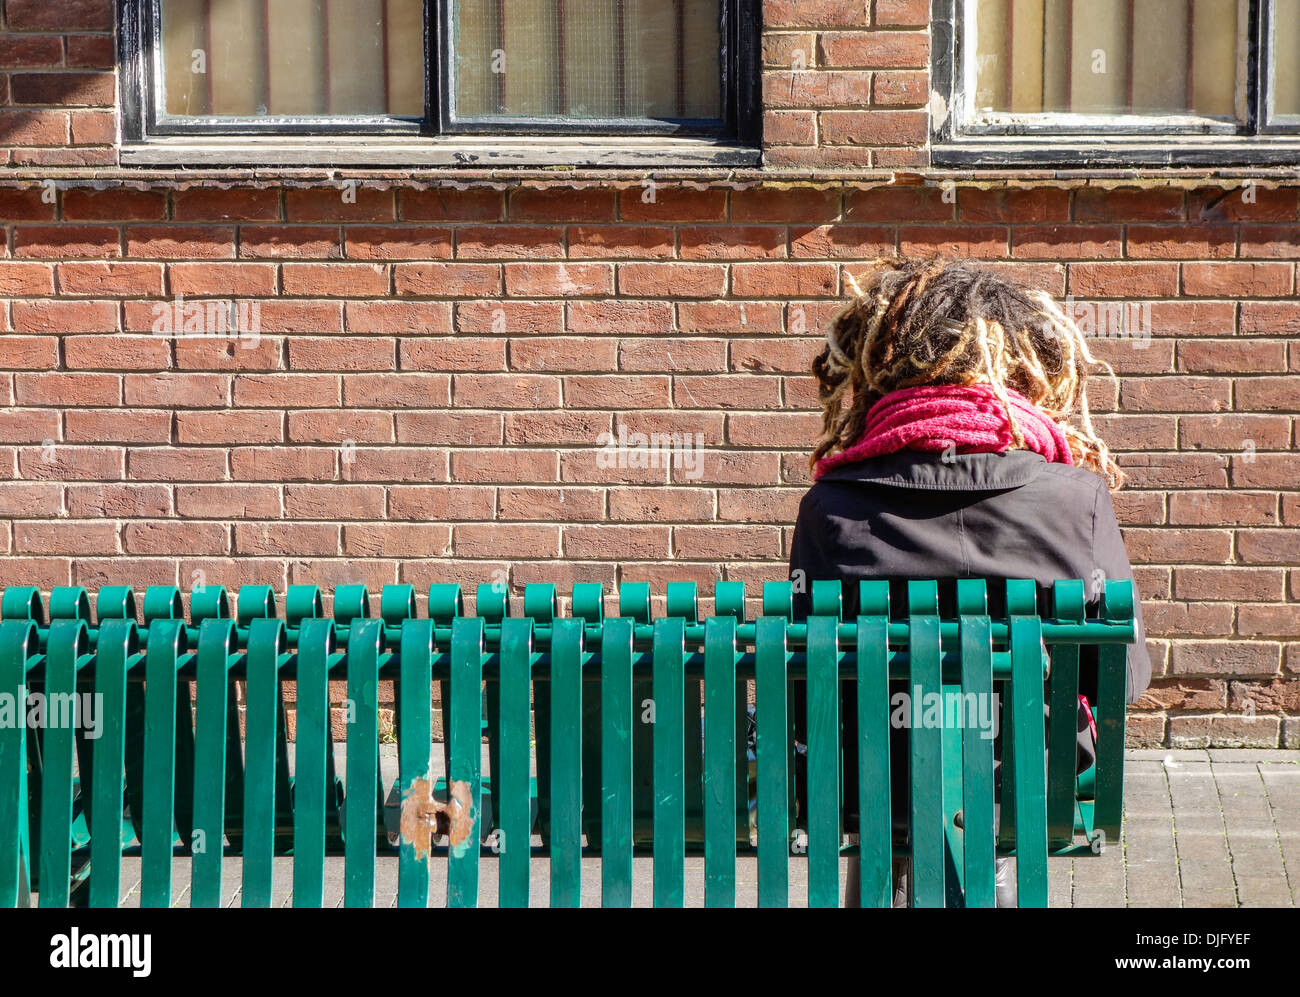 Young person with Dreadlocks sitting on bench Stock Photo